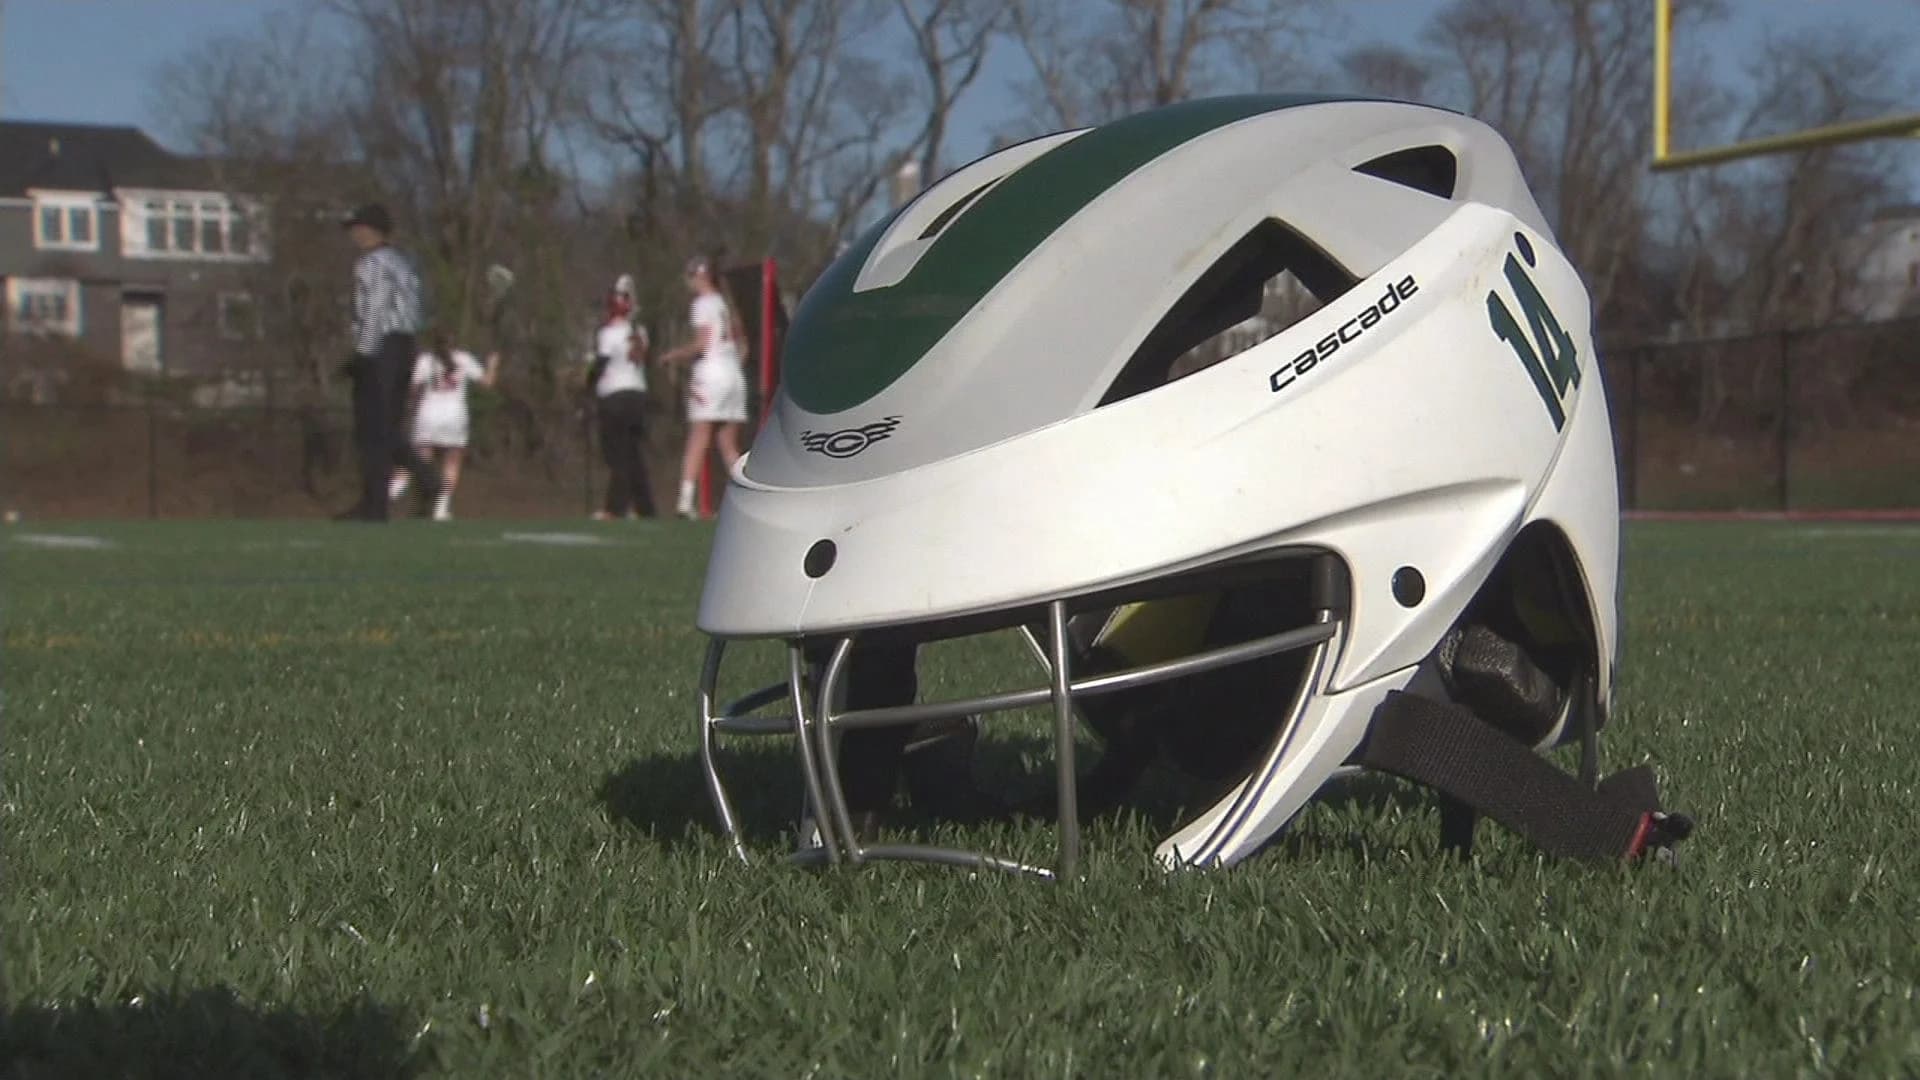 Hard Knocks: Some LI schools concerned over use of head gear by girls lacrosse teams